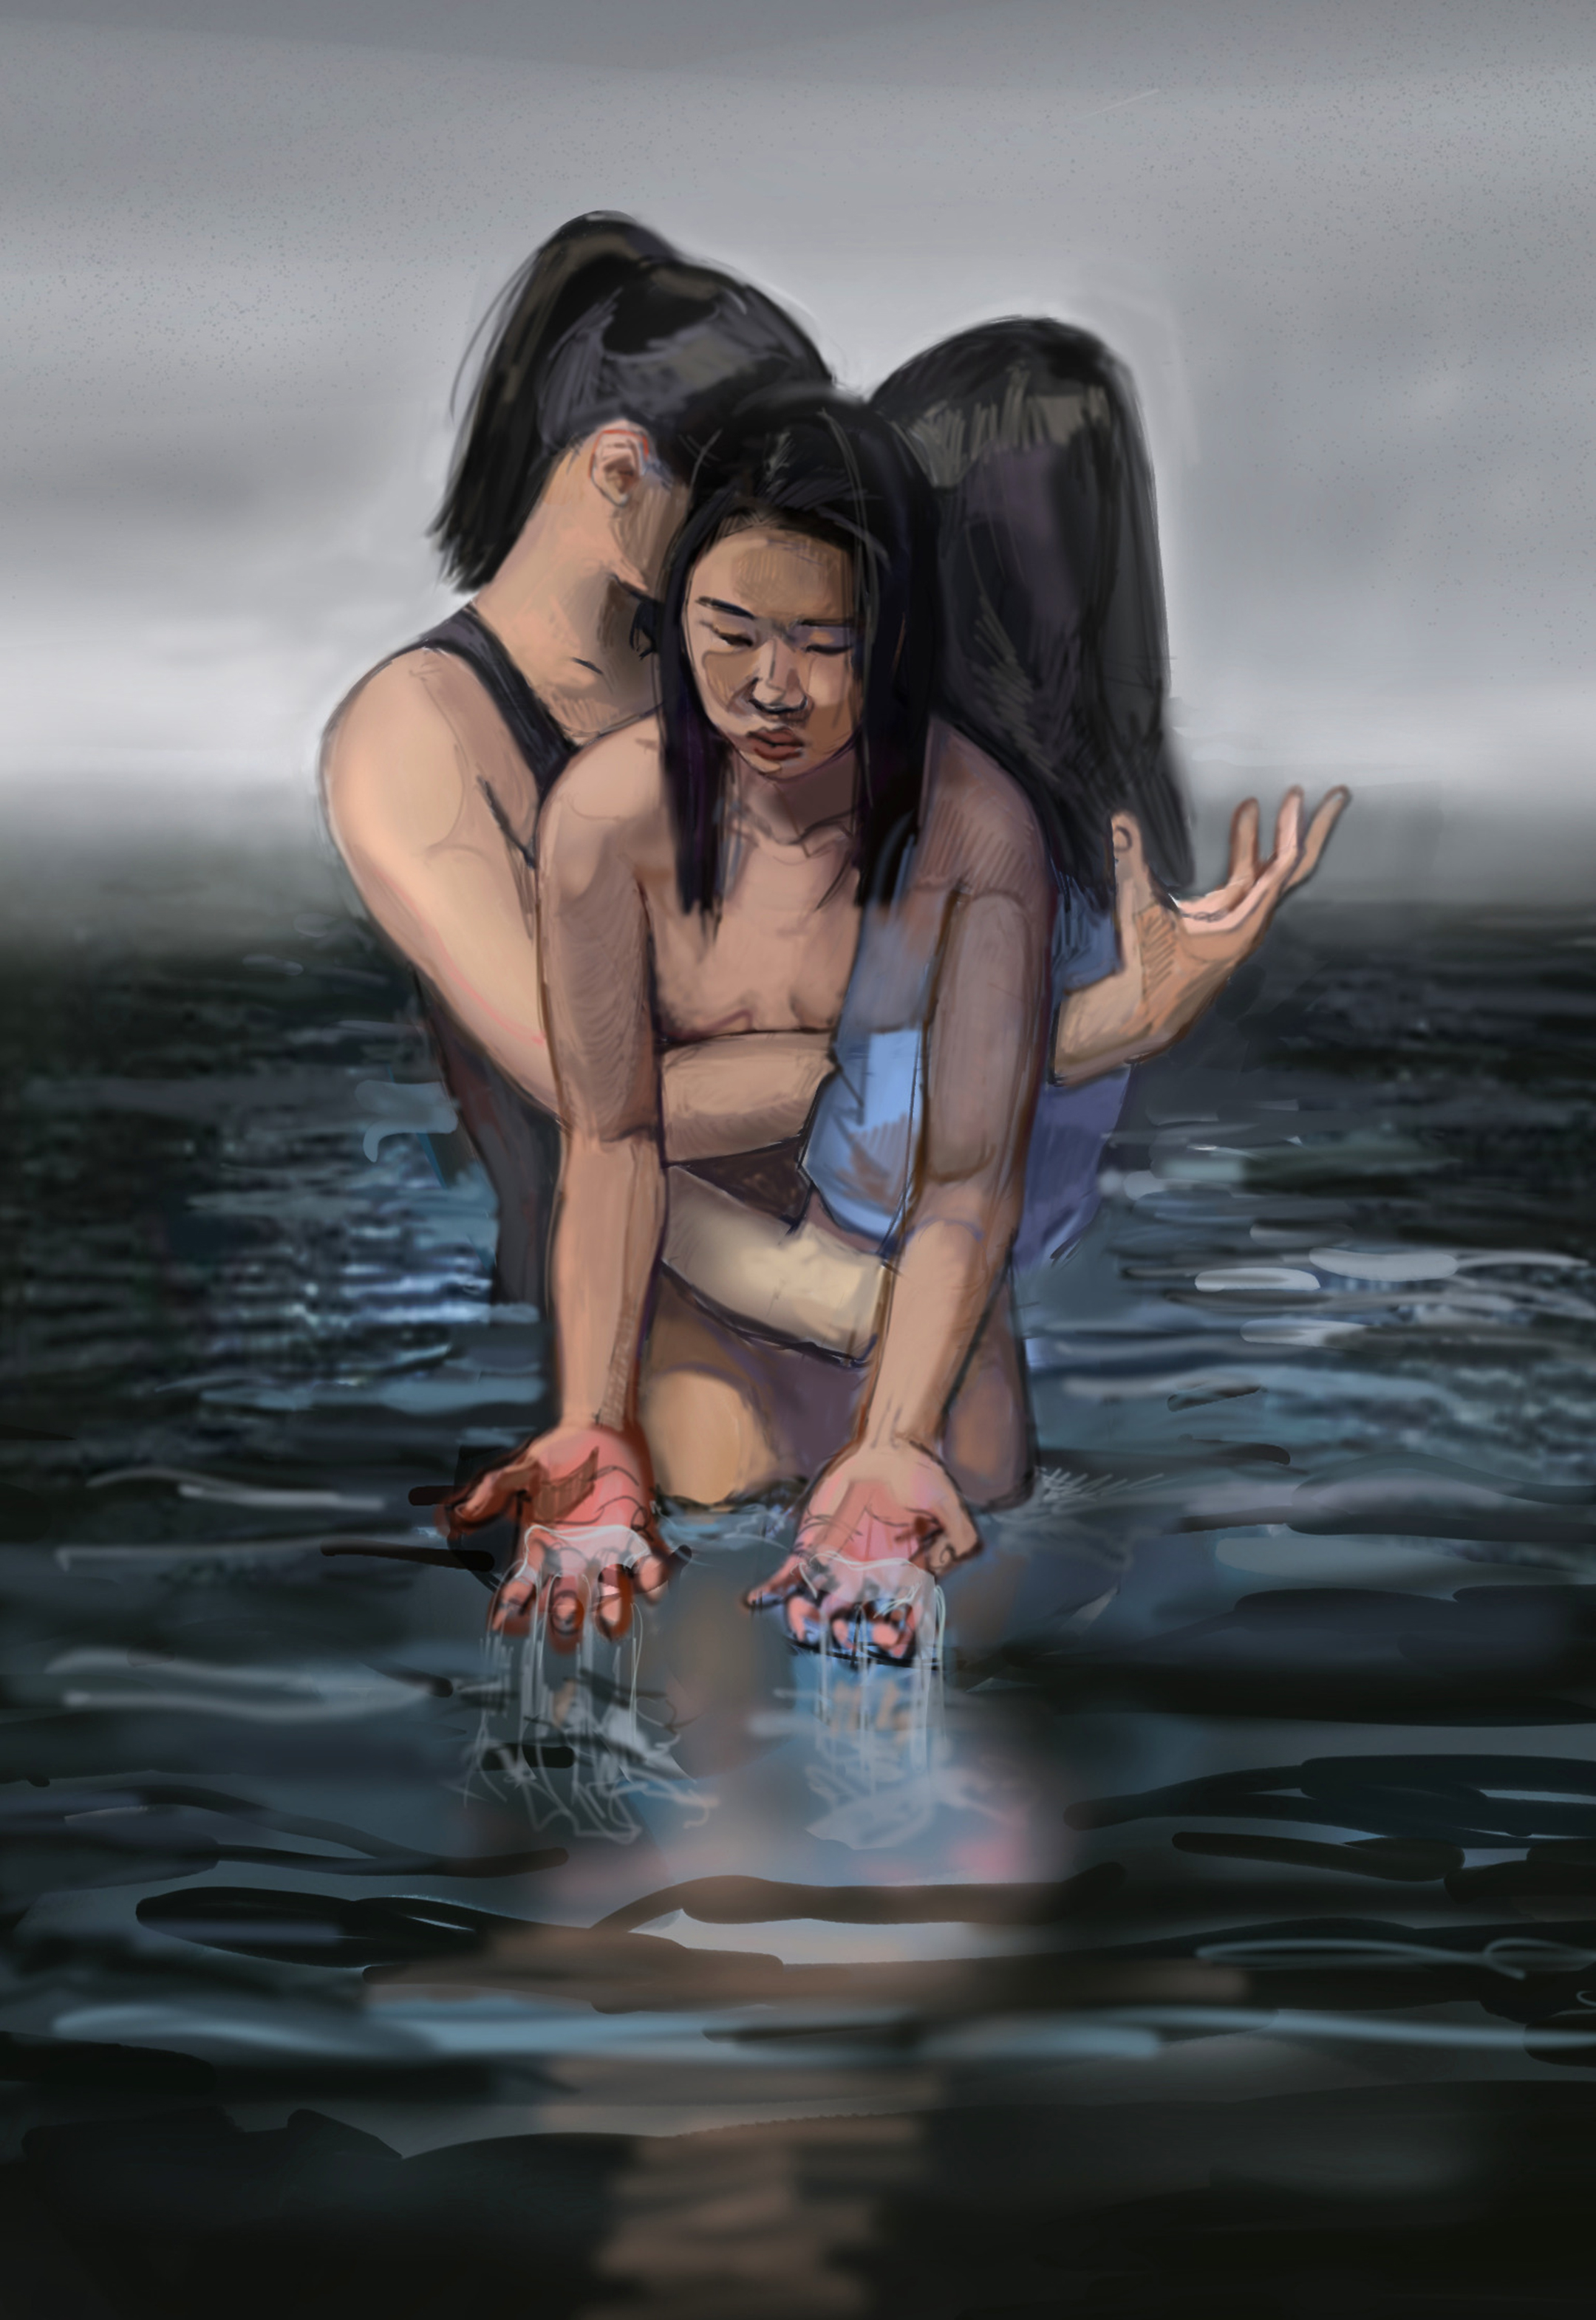 Illustration of three women together at the center of a body of water